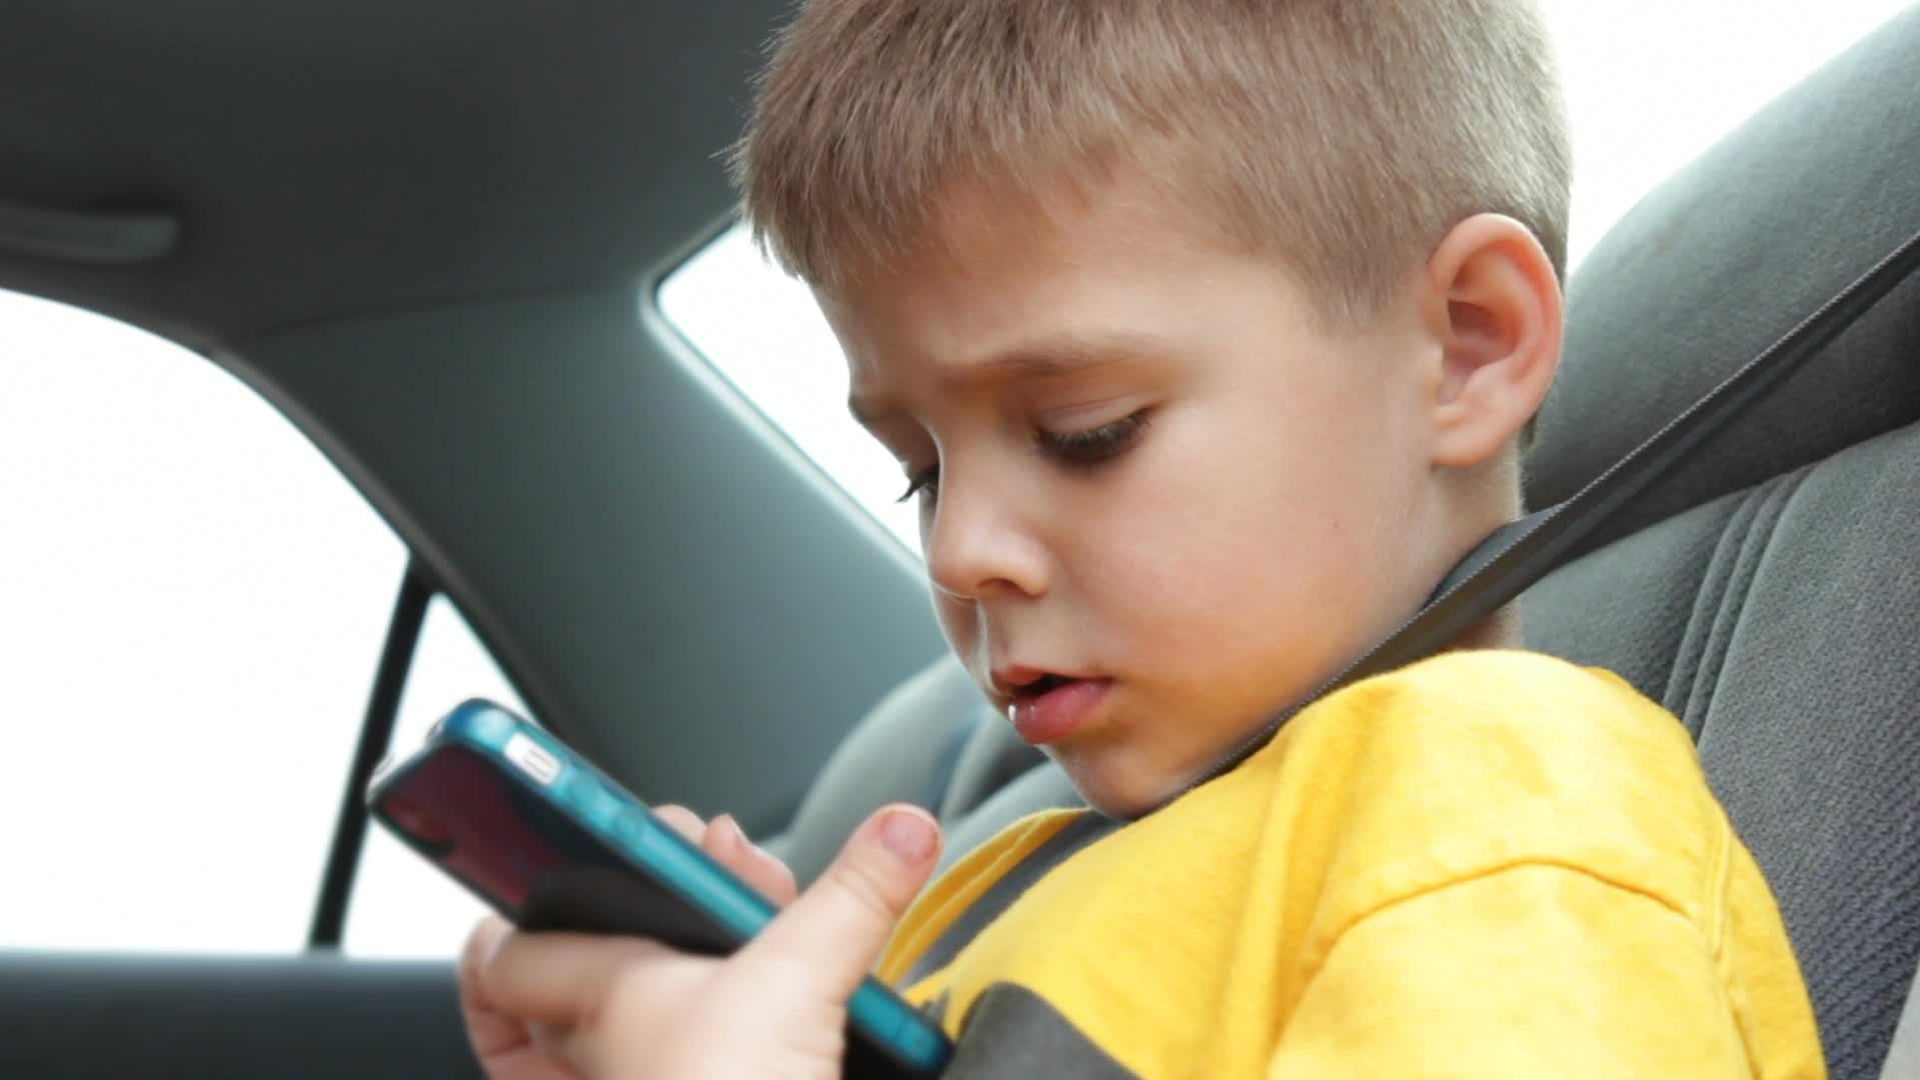 How Can I Monitor My Child’s Phone Without Them Knowing?